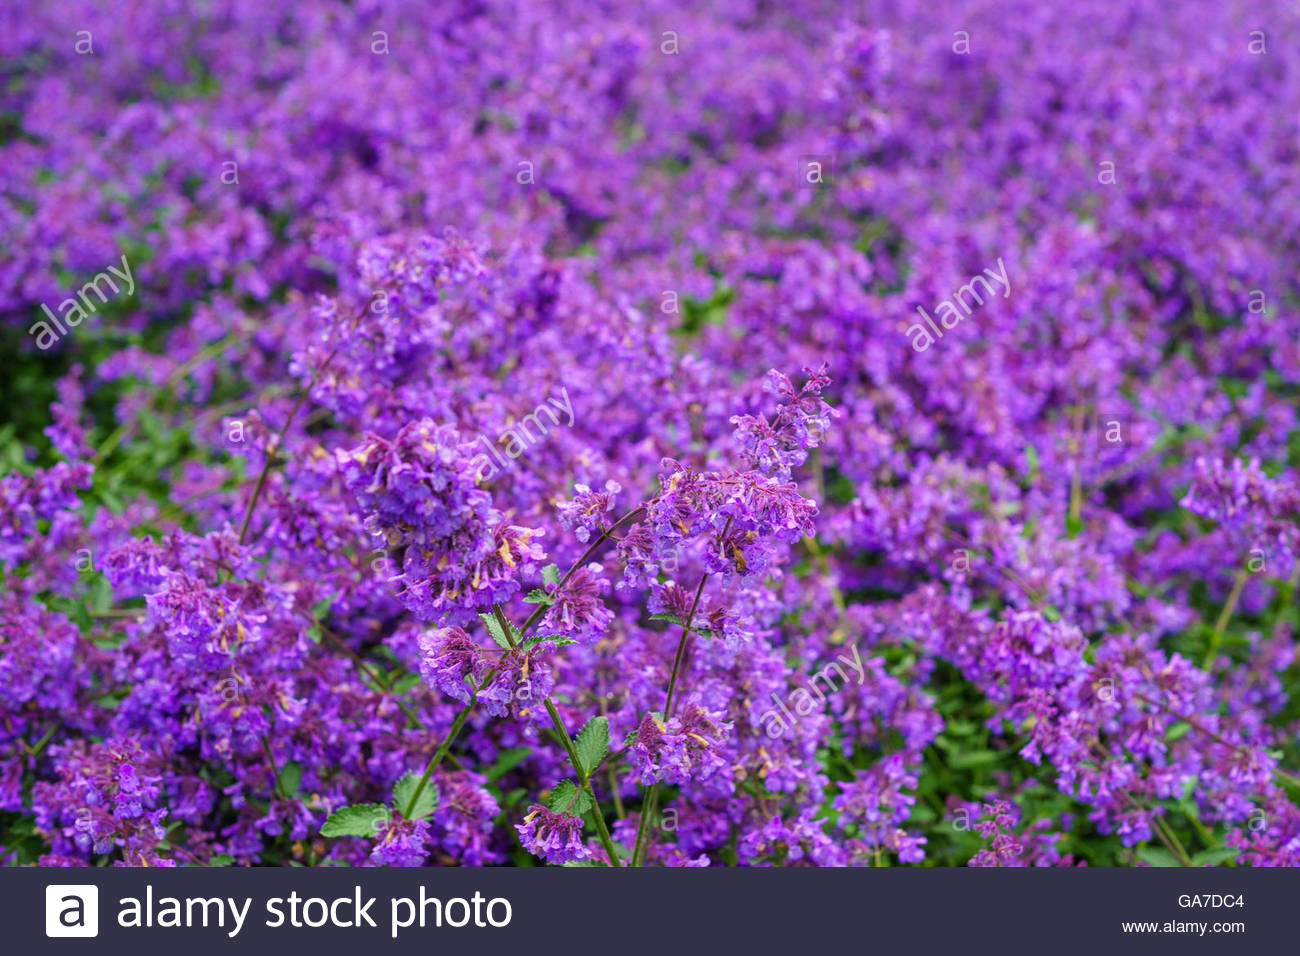 Background Of Nepeta Cataria Or Catmint Flowers With Drops After